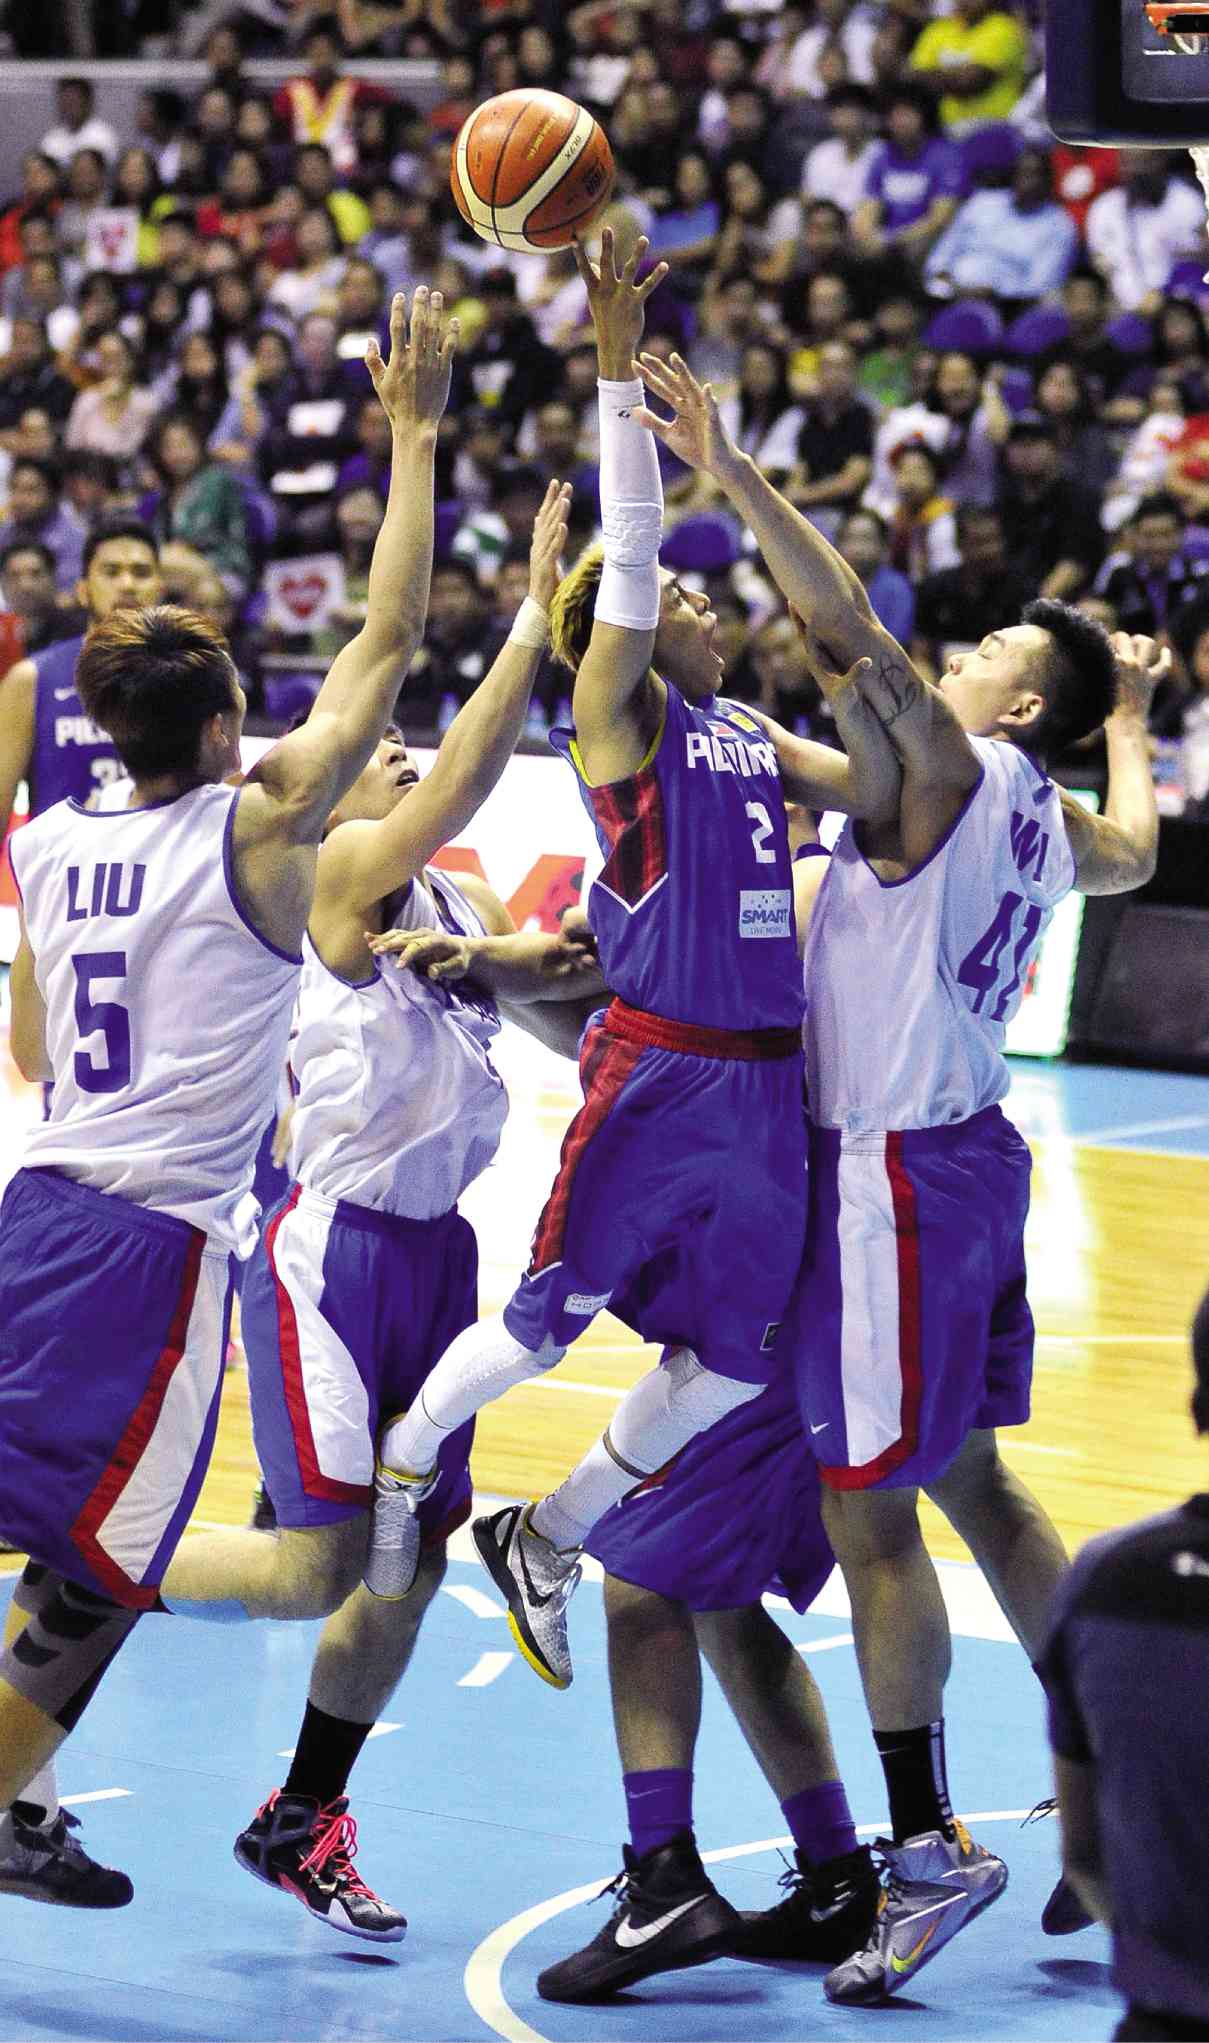 Coach: Romeo style restricts Gilas strategy | Inquirer Sports